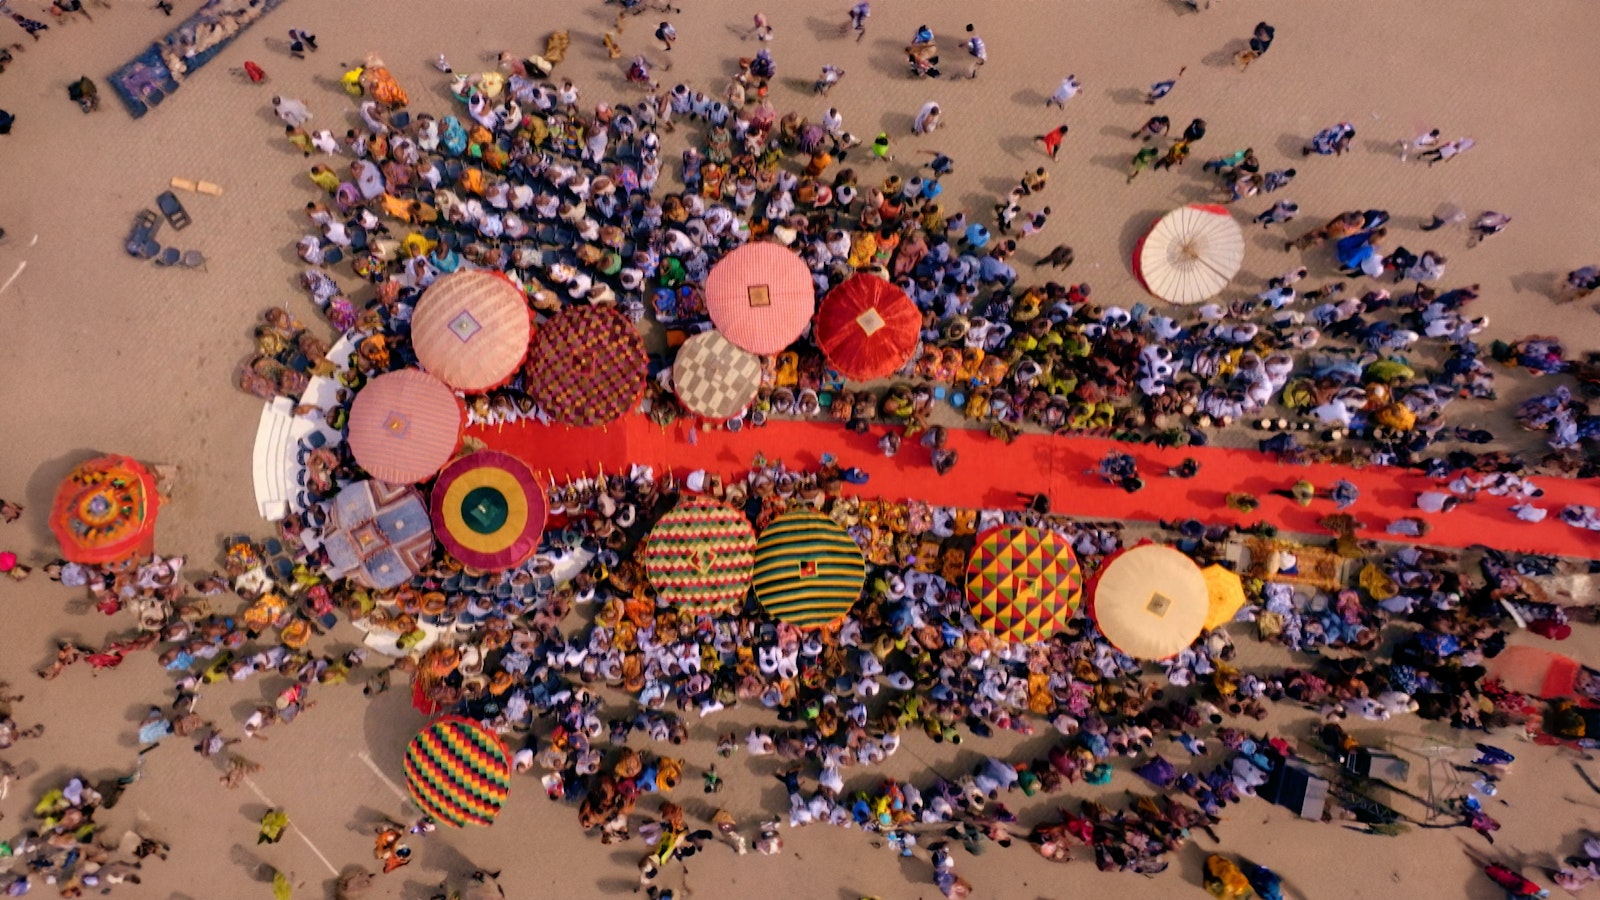 An aerial shot of the Akwasidae Festival with the red carpet leading to the king's throne surrounded by people and parasols.